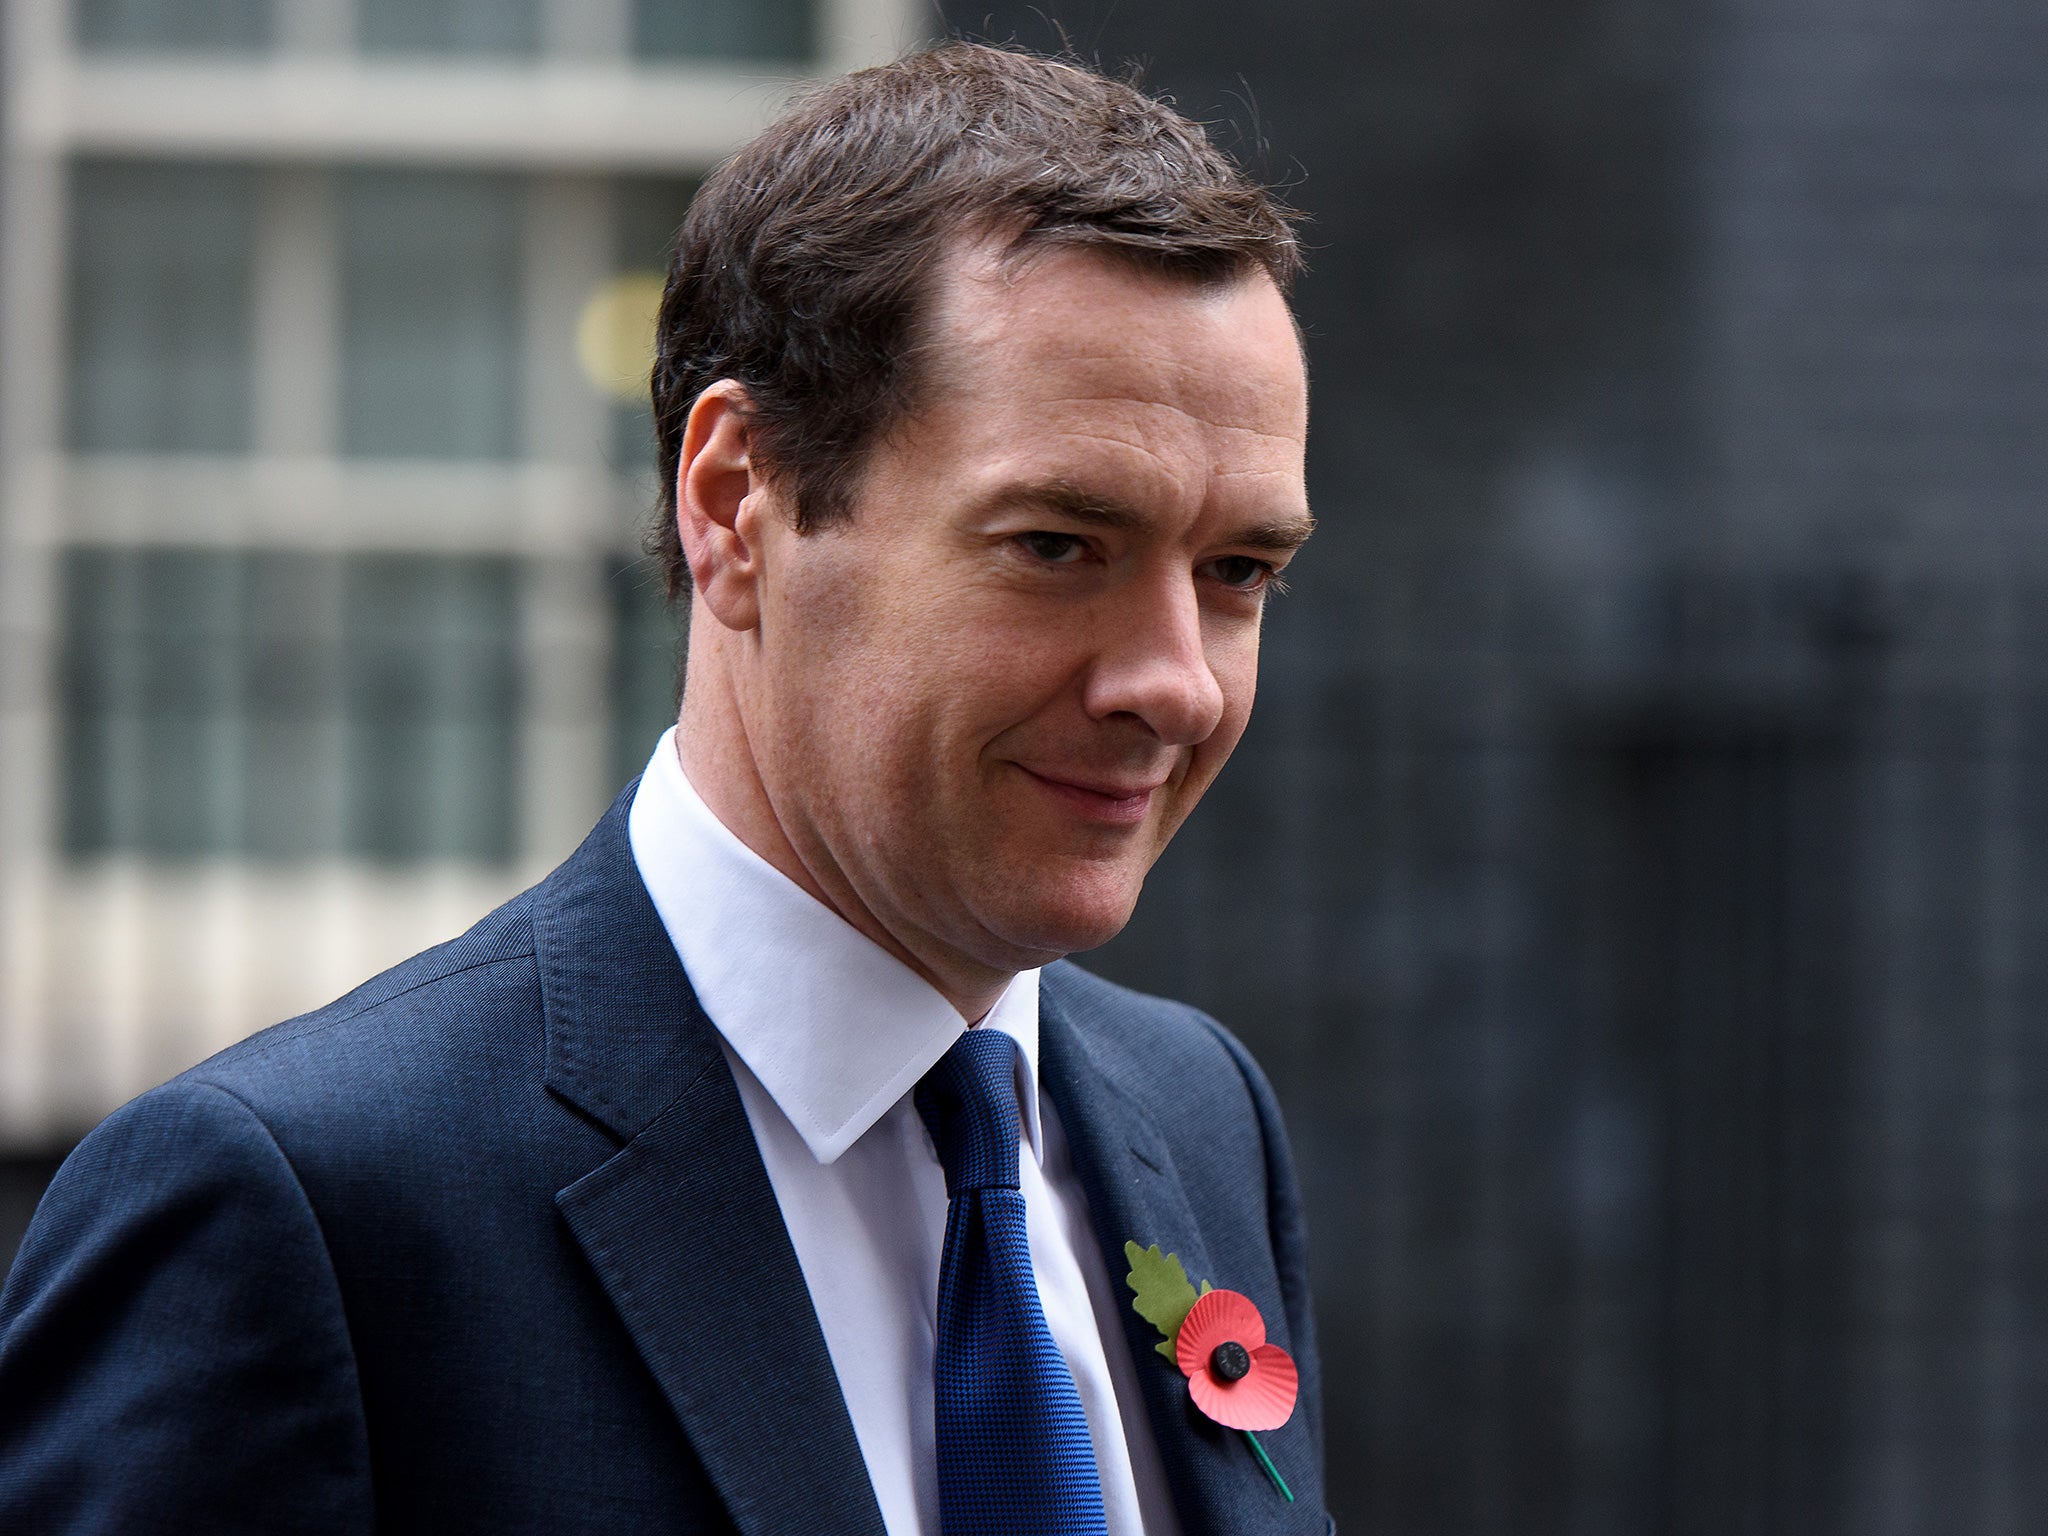 George Osborne will be urged to help to end the discrimination against people with mental health problems